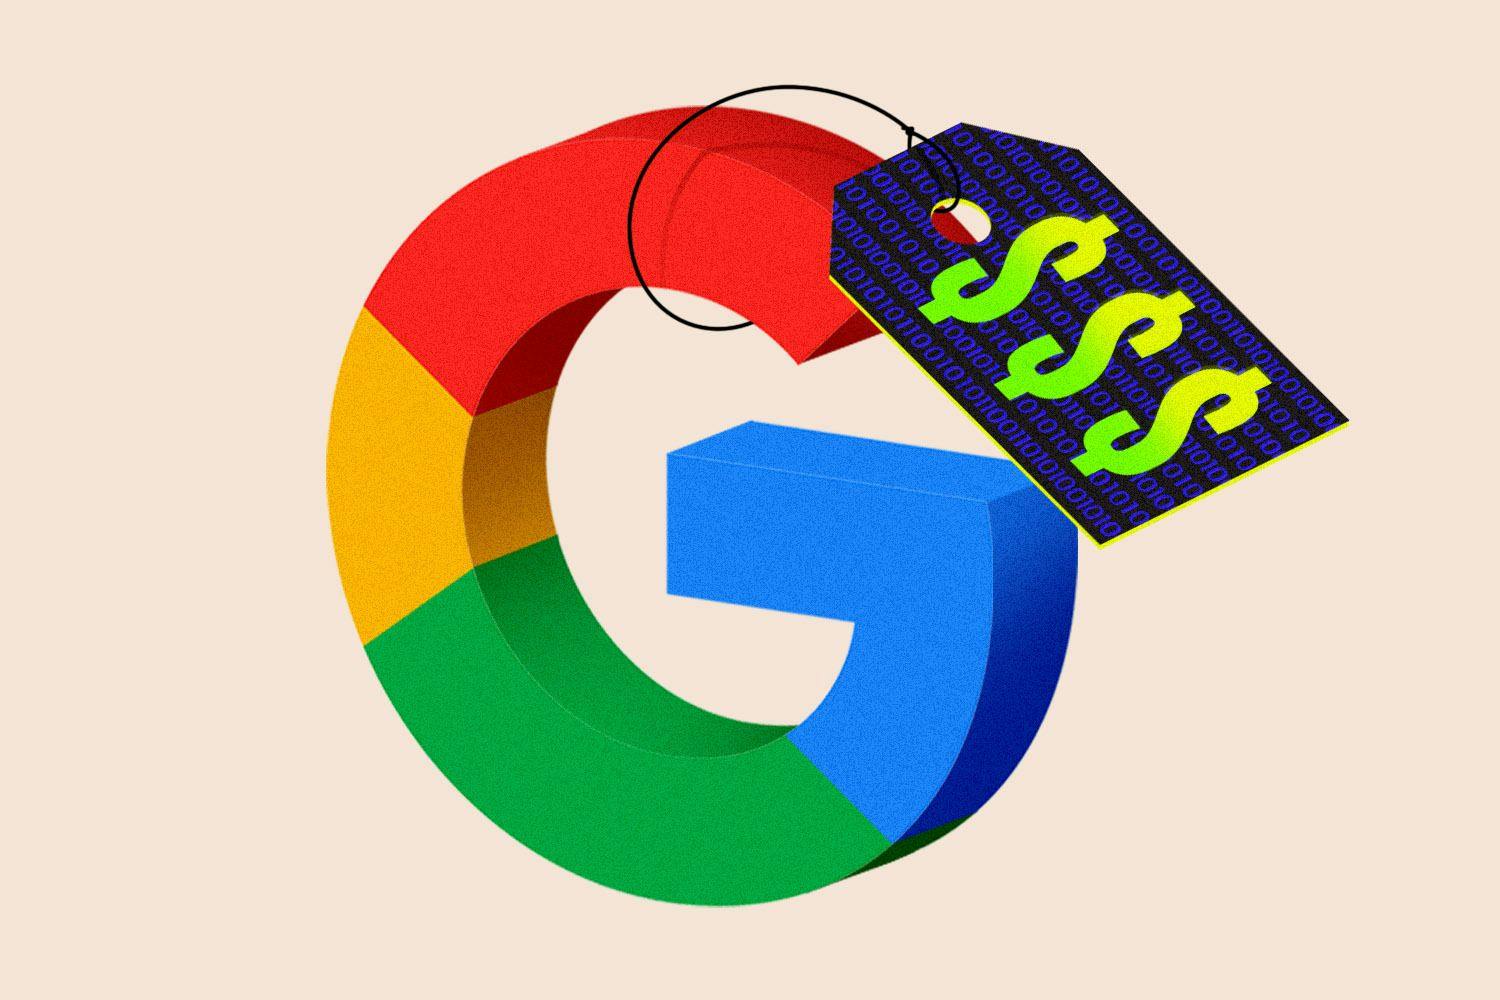 Google logo with a price tag